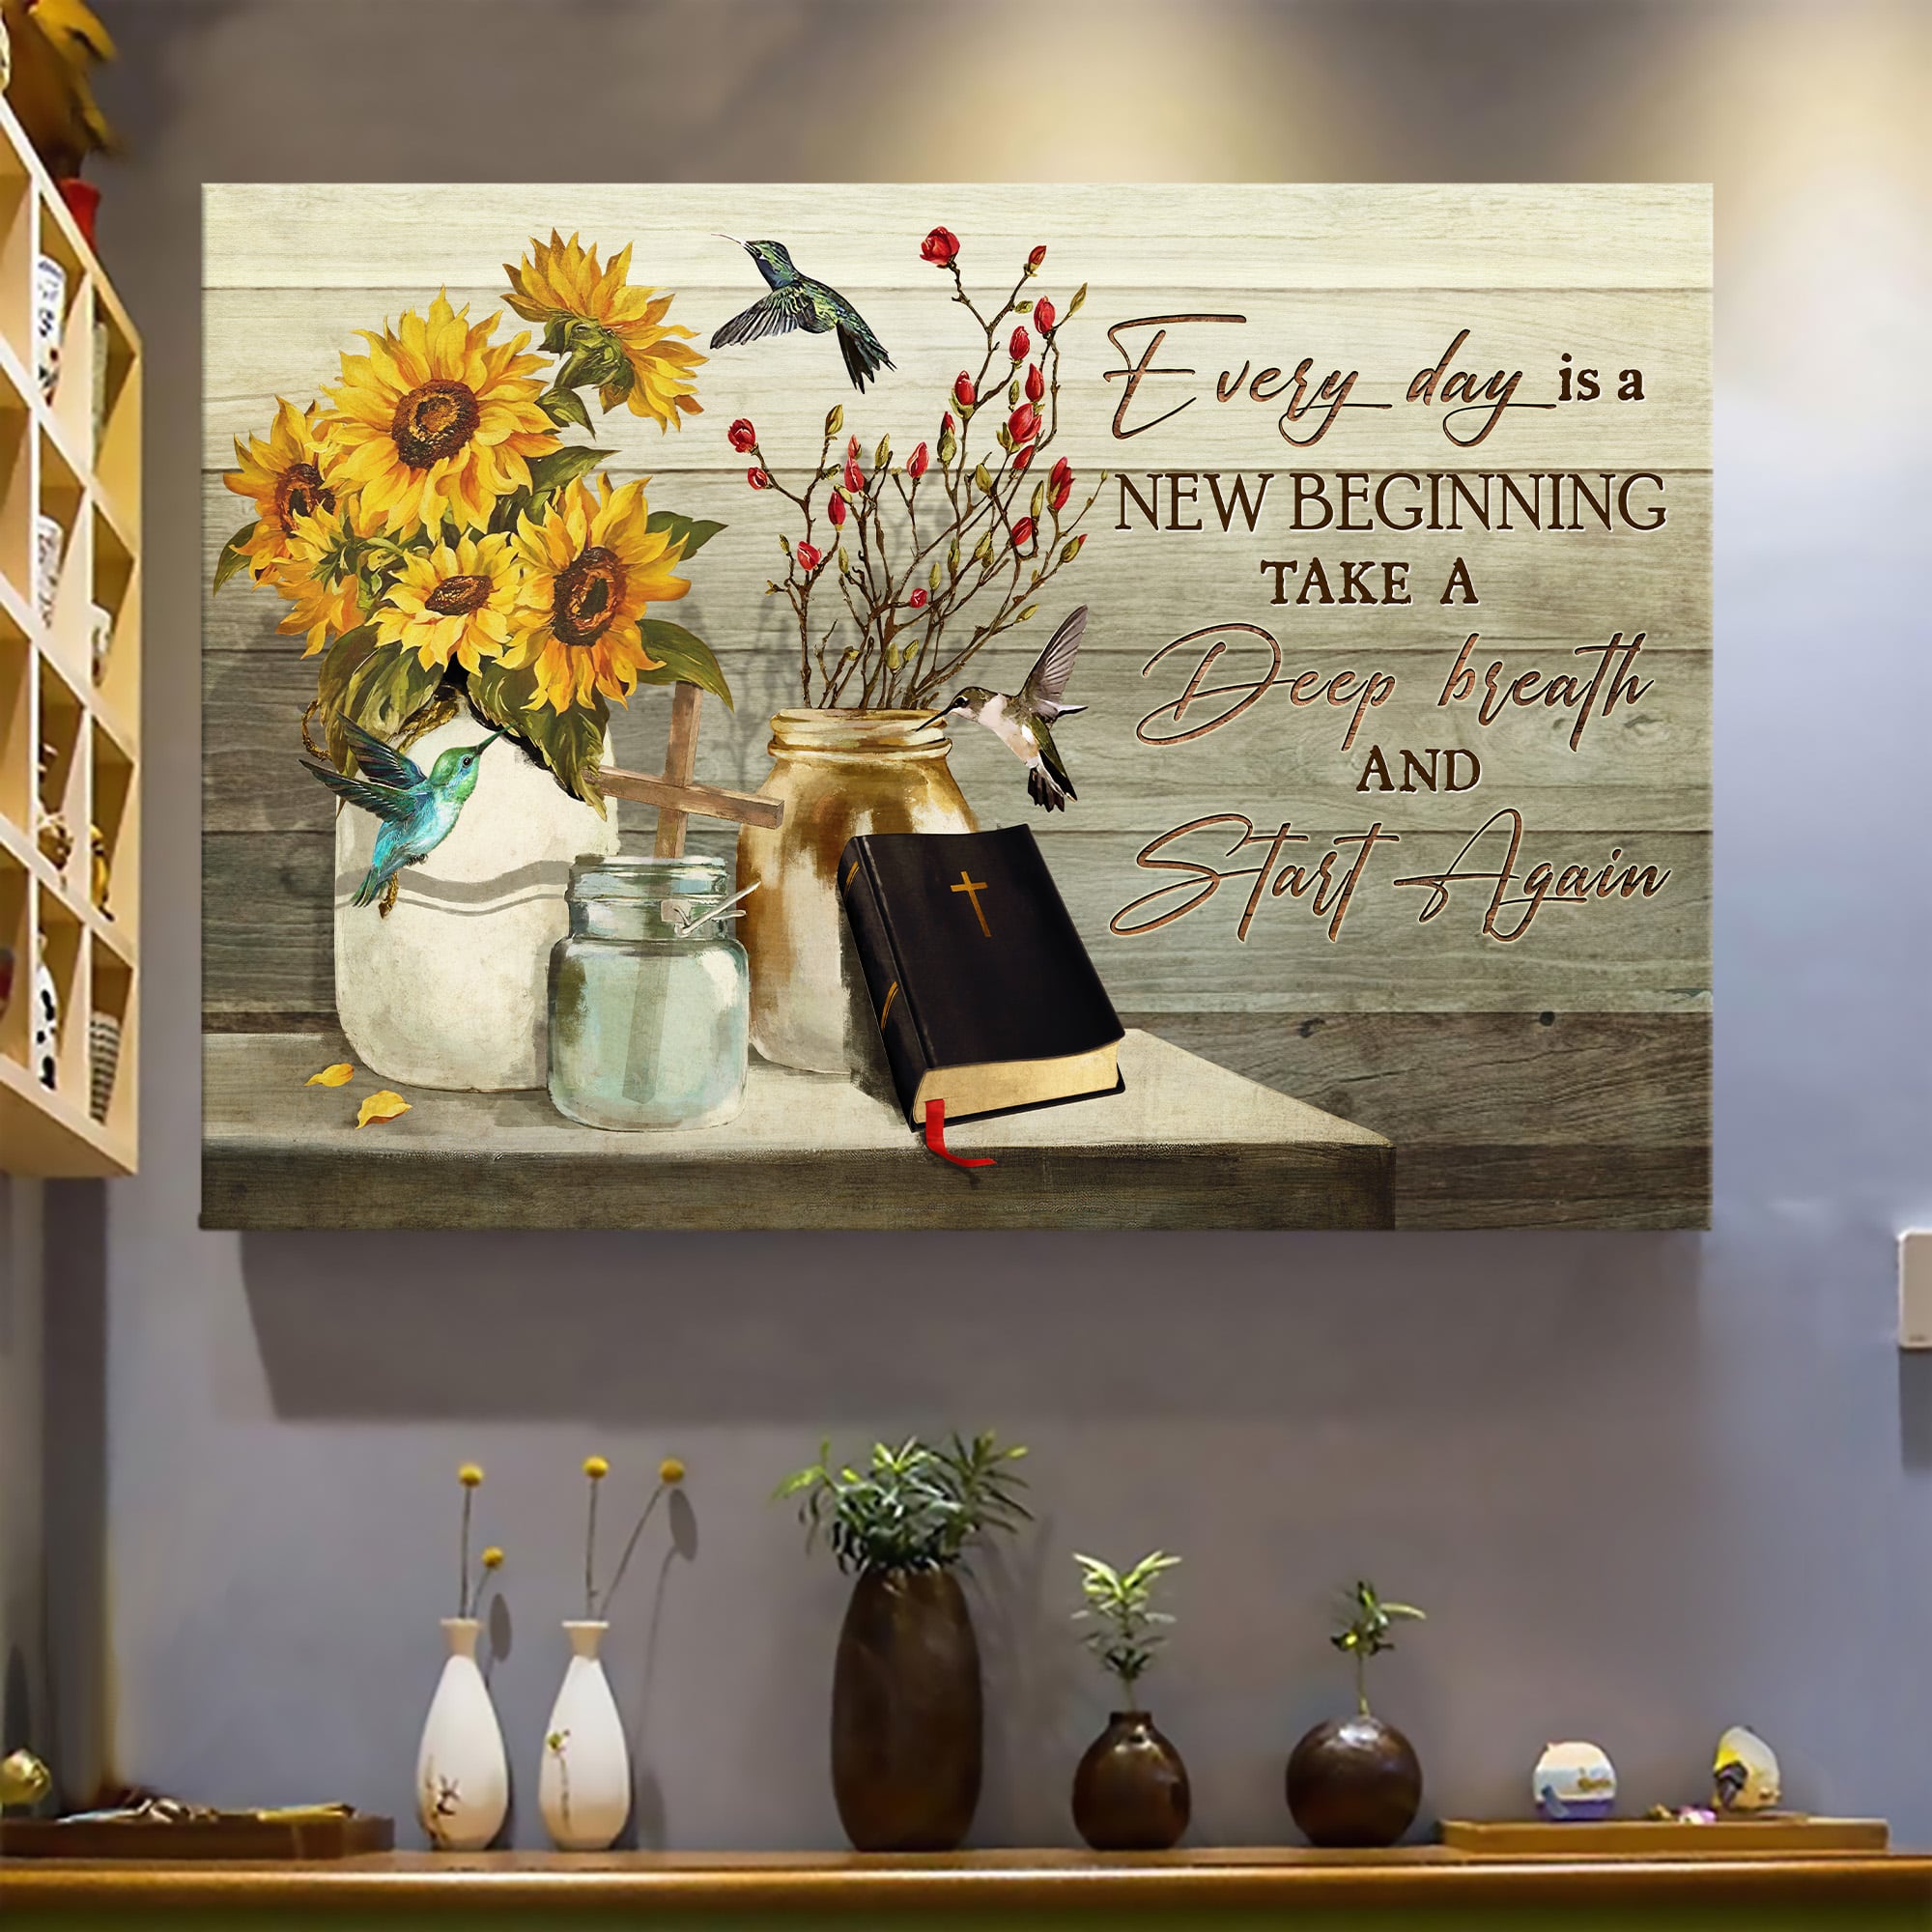 Sunflower painting, Wooden cross, Bible, Every day is a new beginning - Jesus Landscape Canvas Prints - Wall Art